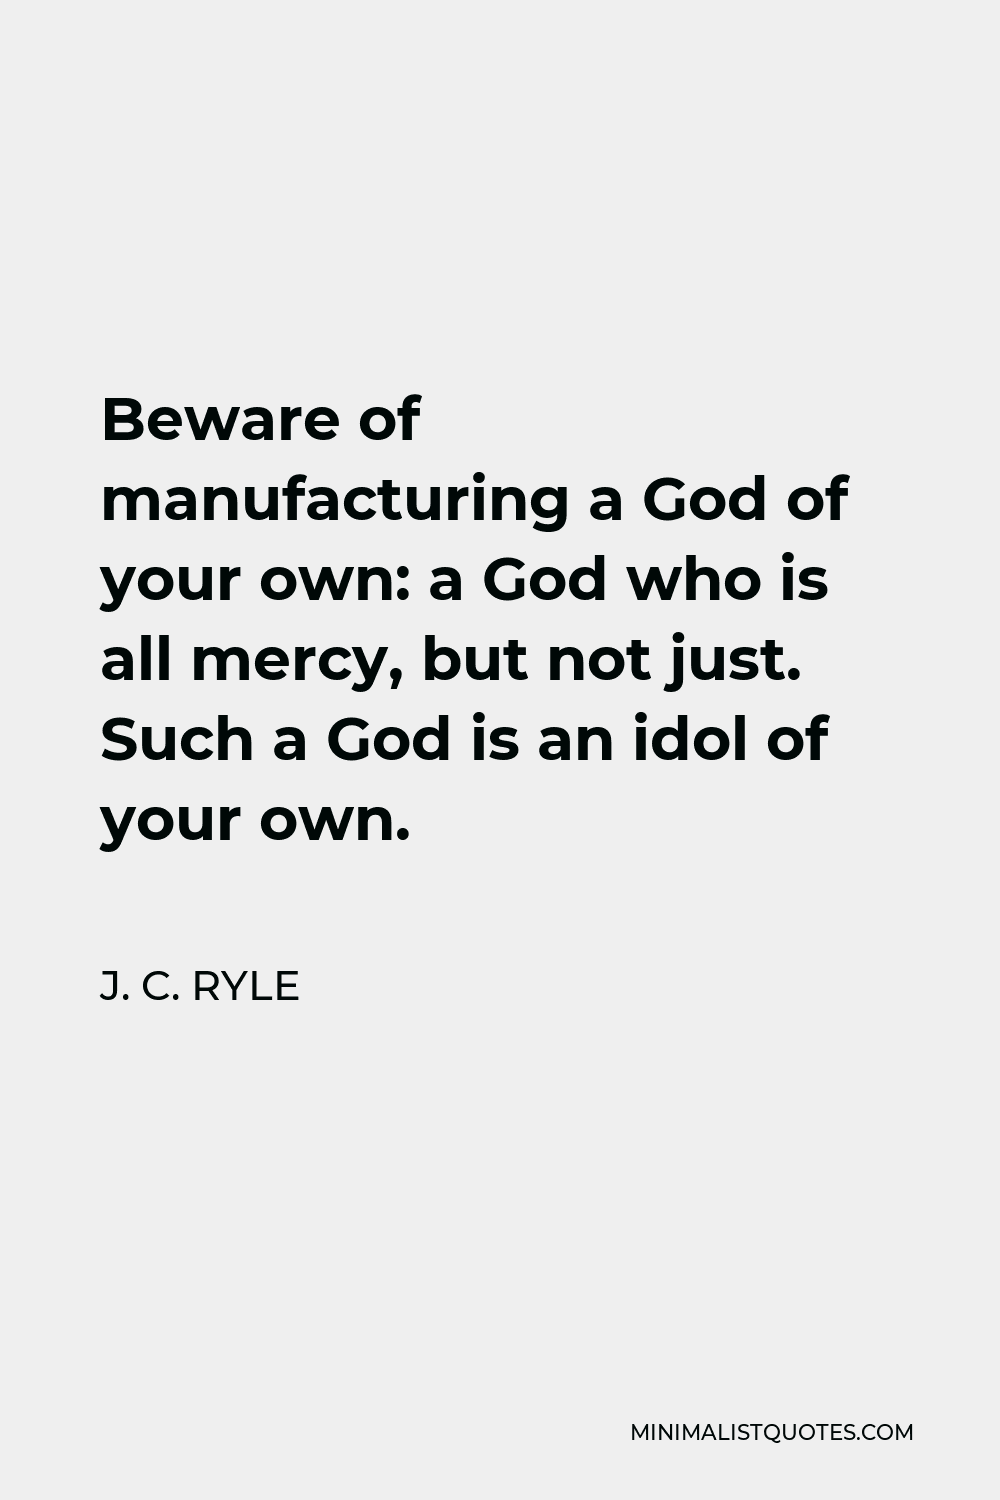 J. C. Ryle Quote - Beware of manufacturing a God of your own: a God who is all mercy, but not just. Such a God is an idol of your own.